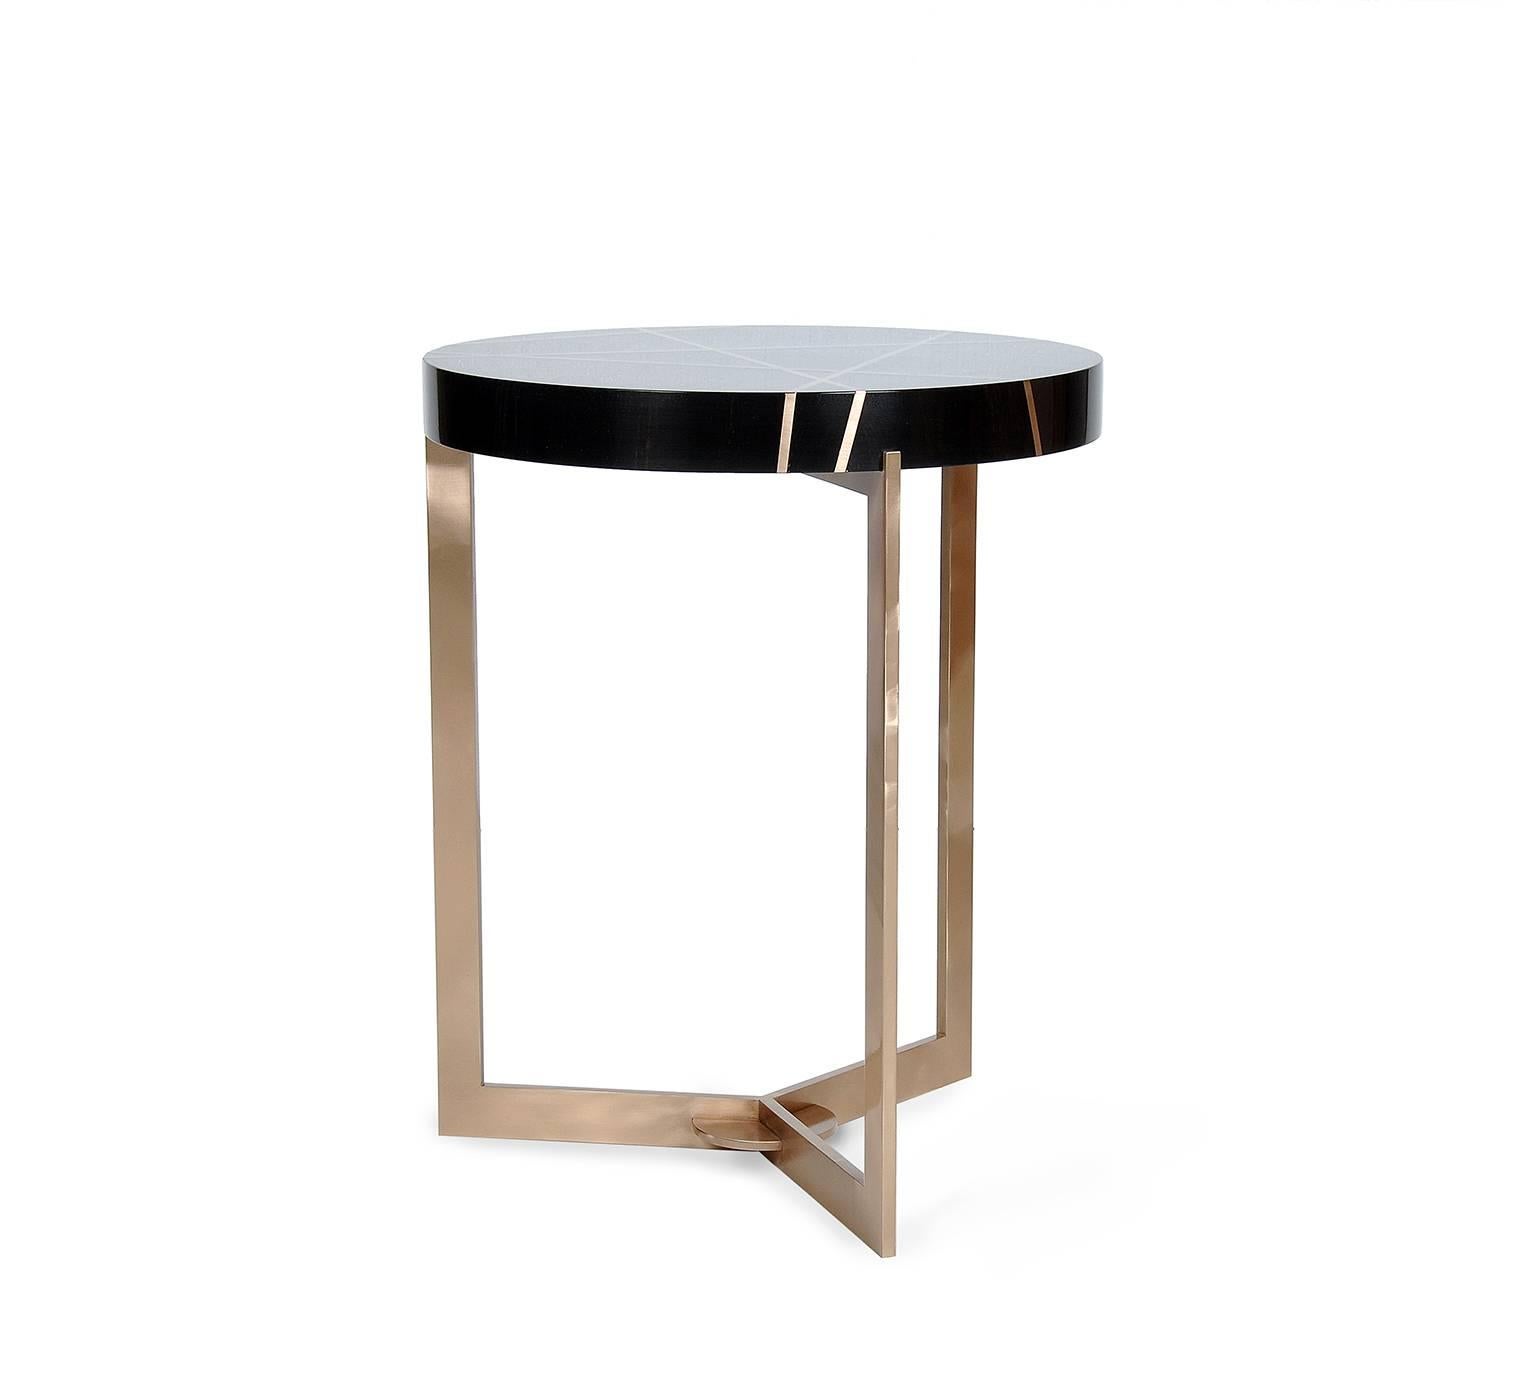 The ray end table in ebony and bronze is created to be a notable accent piece. It is at once rich, luxurious and complicated, while maintaining a serious and serene form.   Ebony is a member of the diosypros family and comes from northern Africa. It